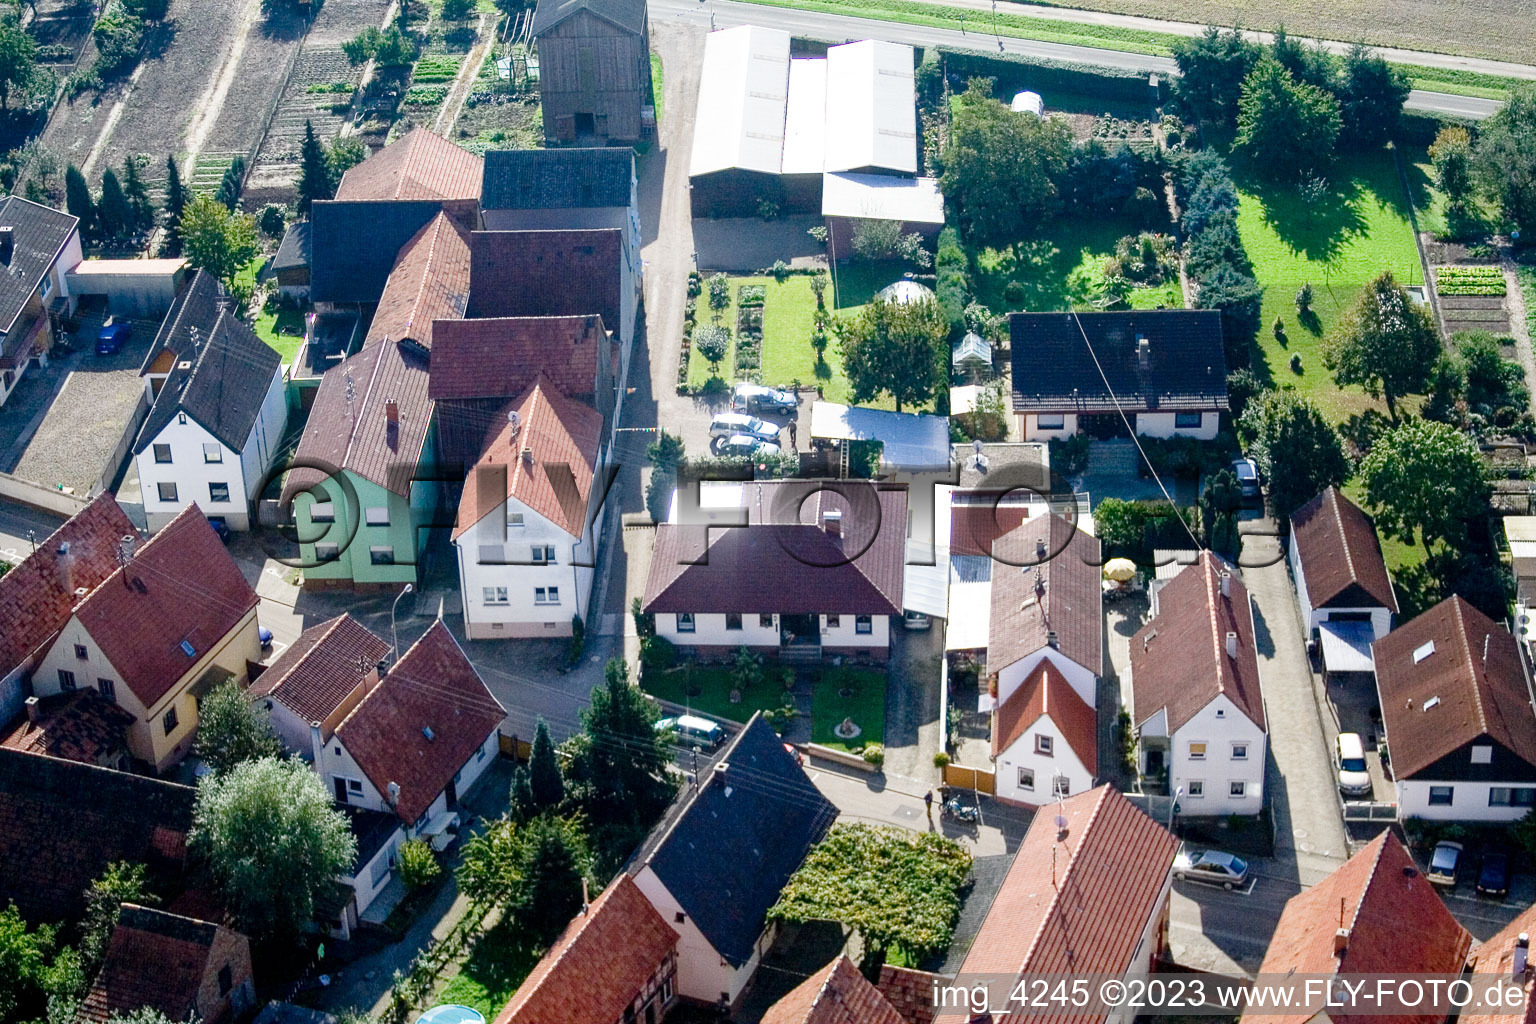 Drone image of Brehmstr in the district Minderslachen in Kandel in the state Rhineland-Palatinate, Germany